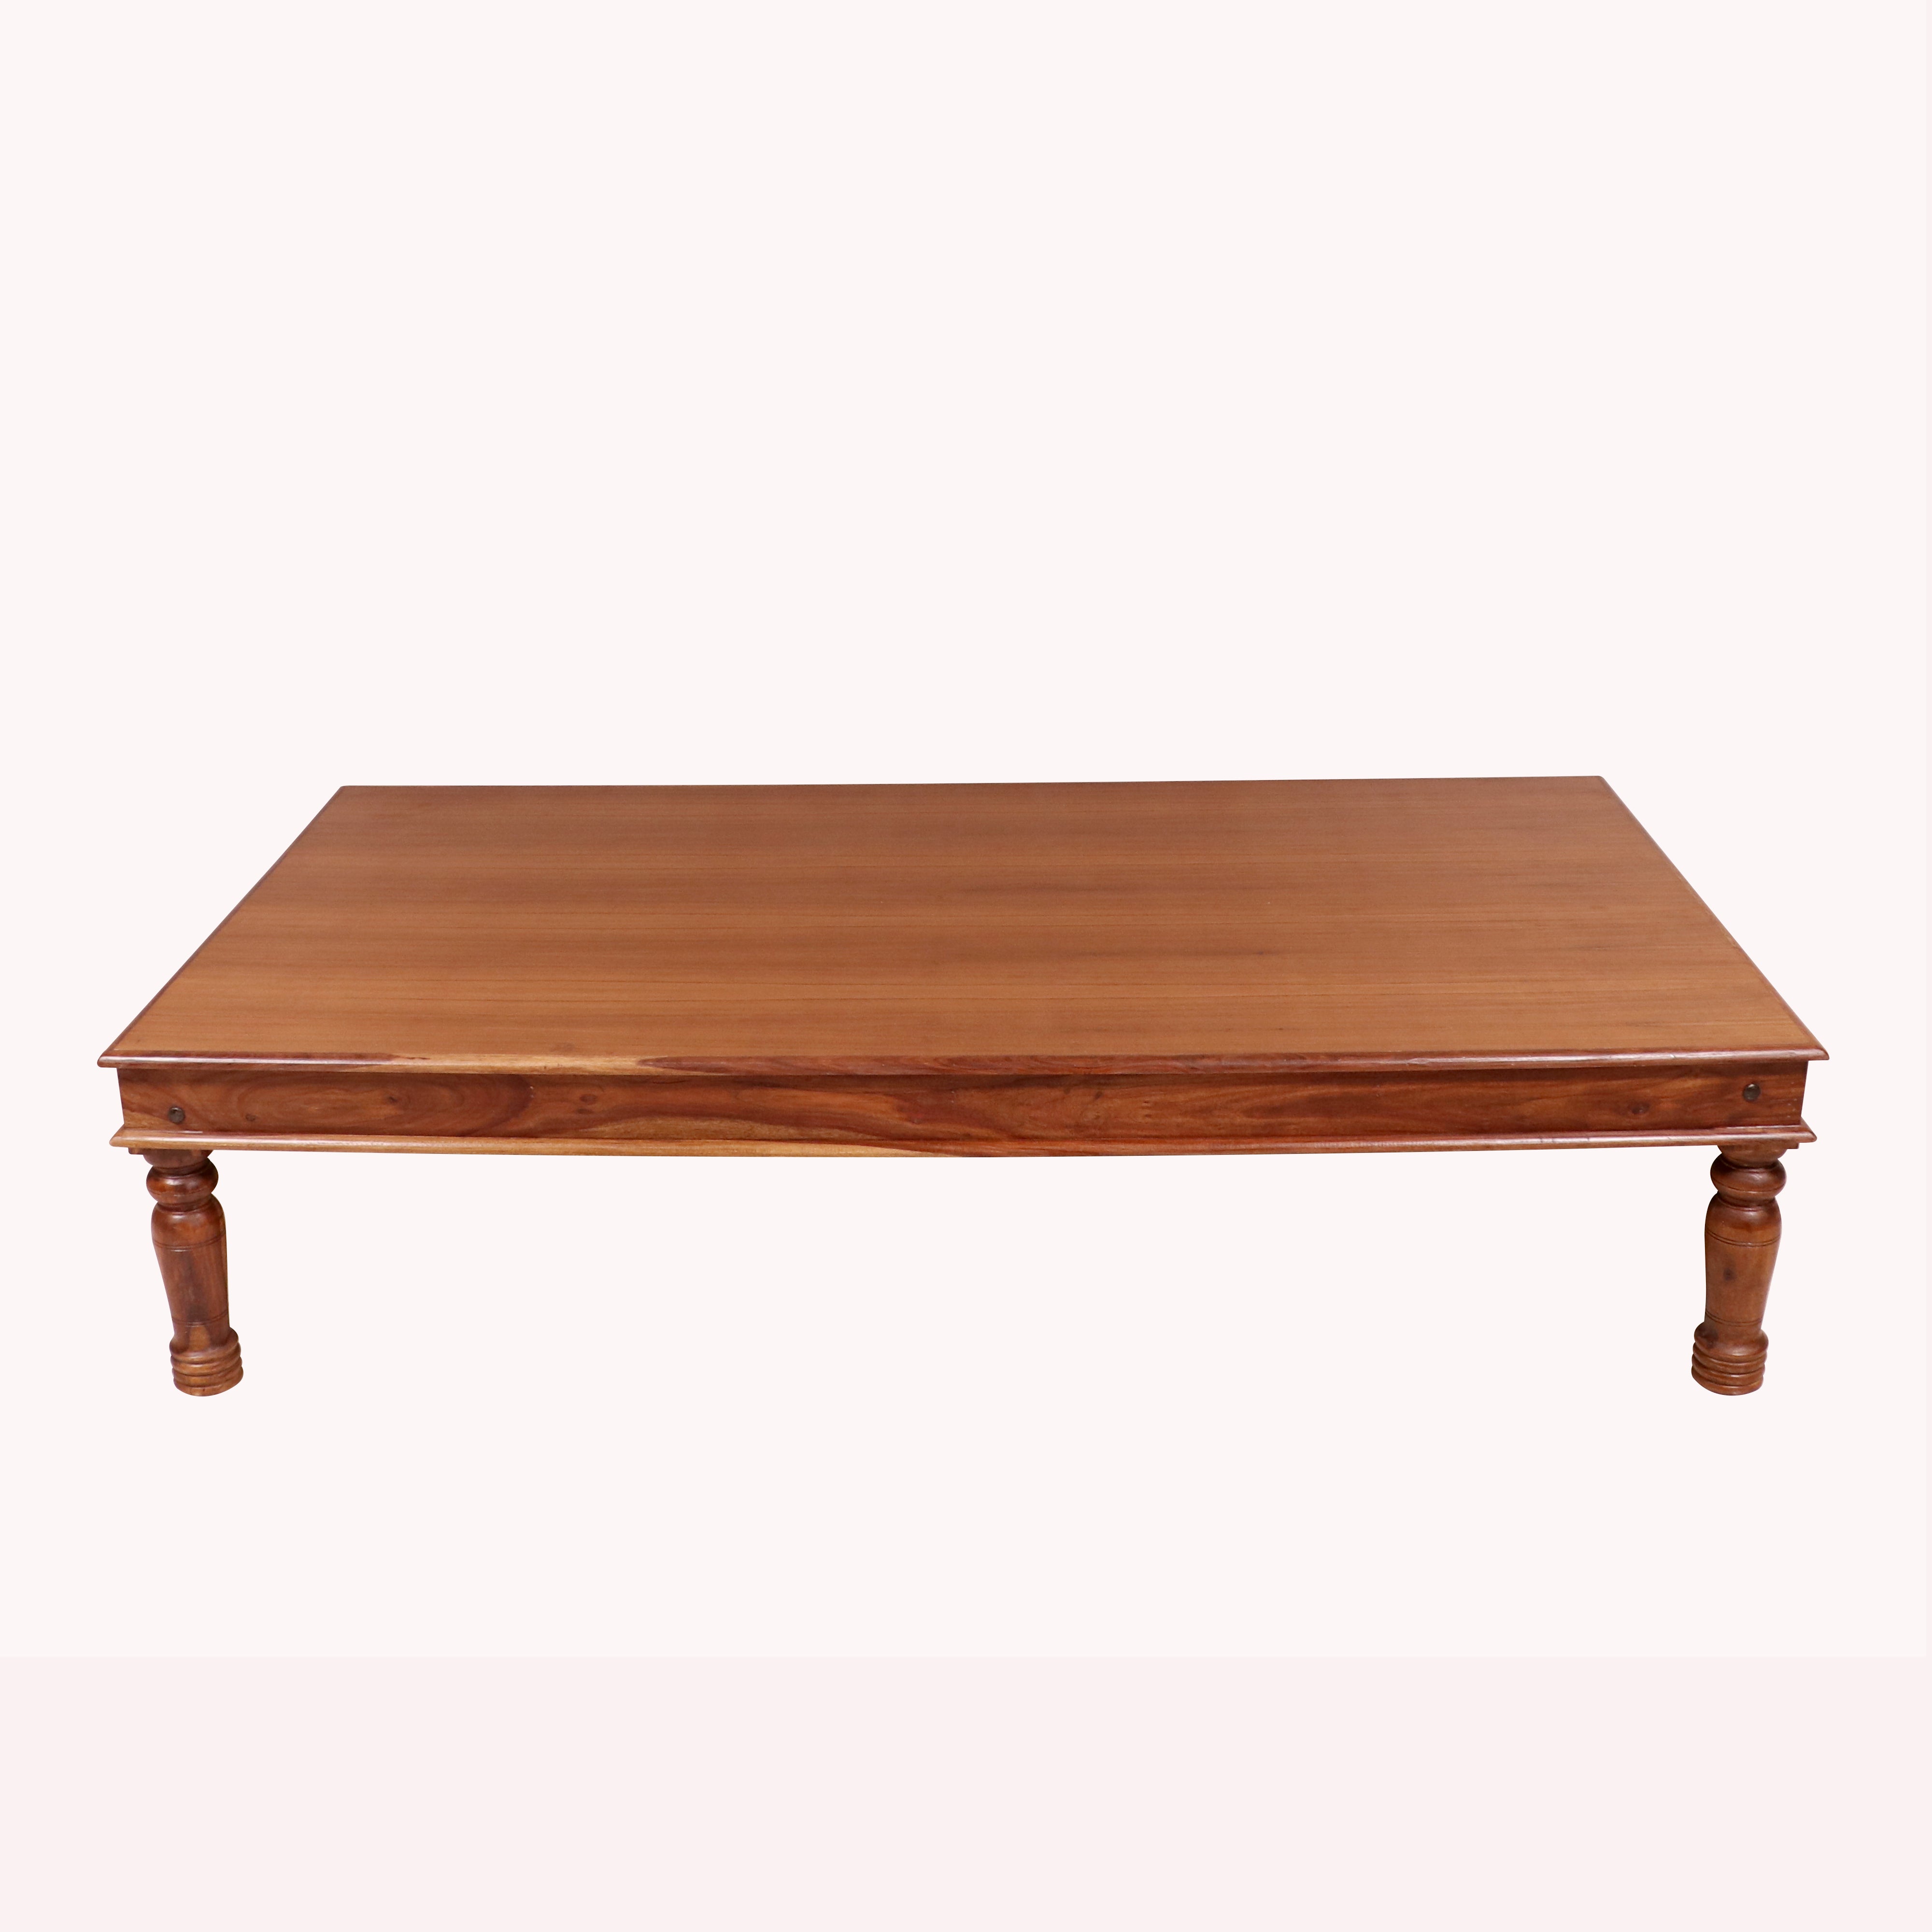 Sheesham wood Round legs with veneer Classical indian Paat Bed